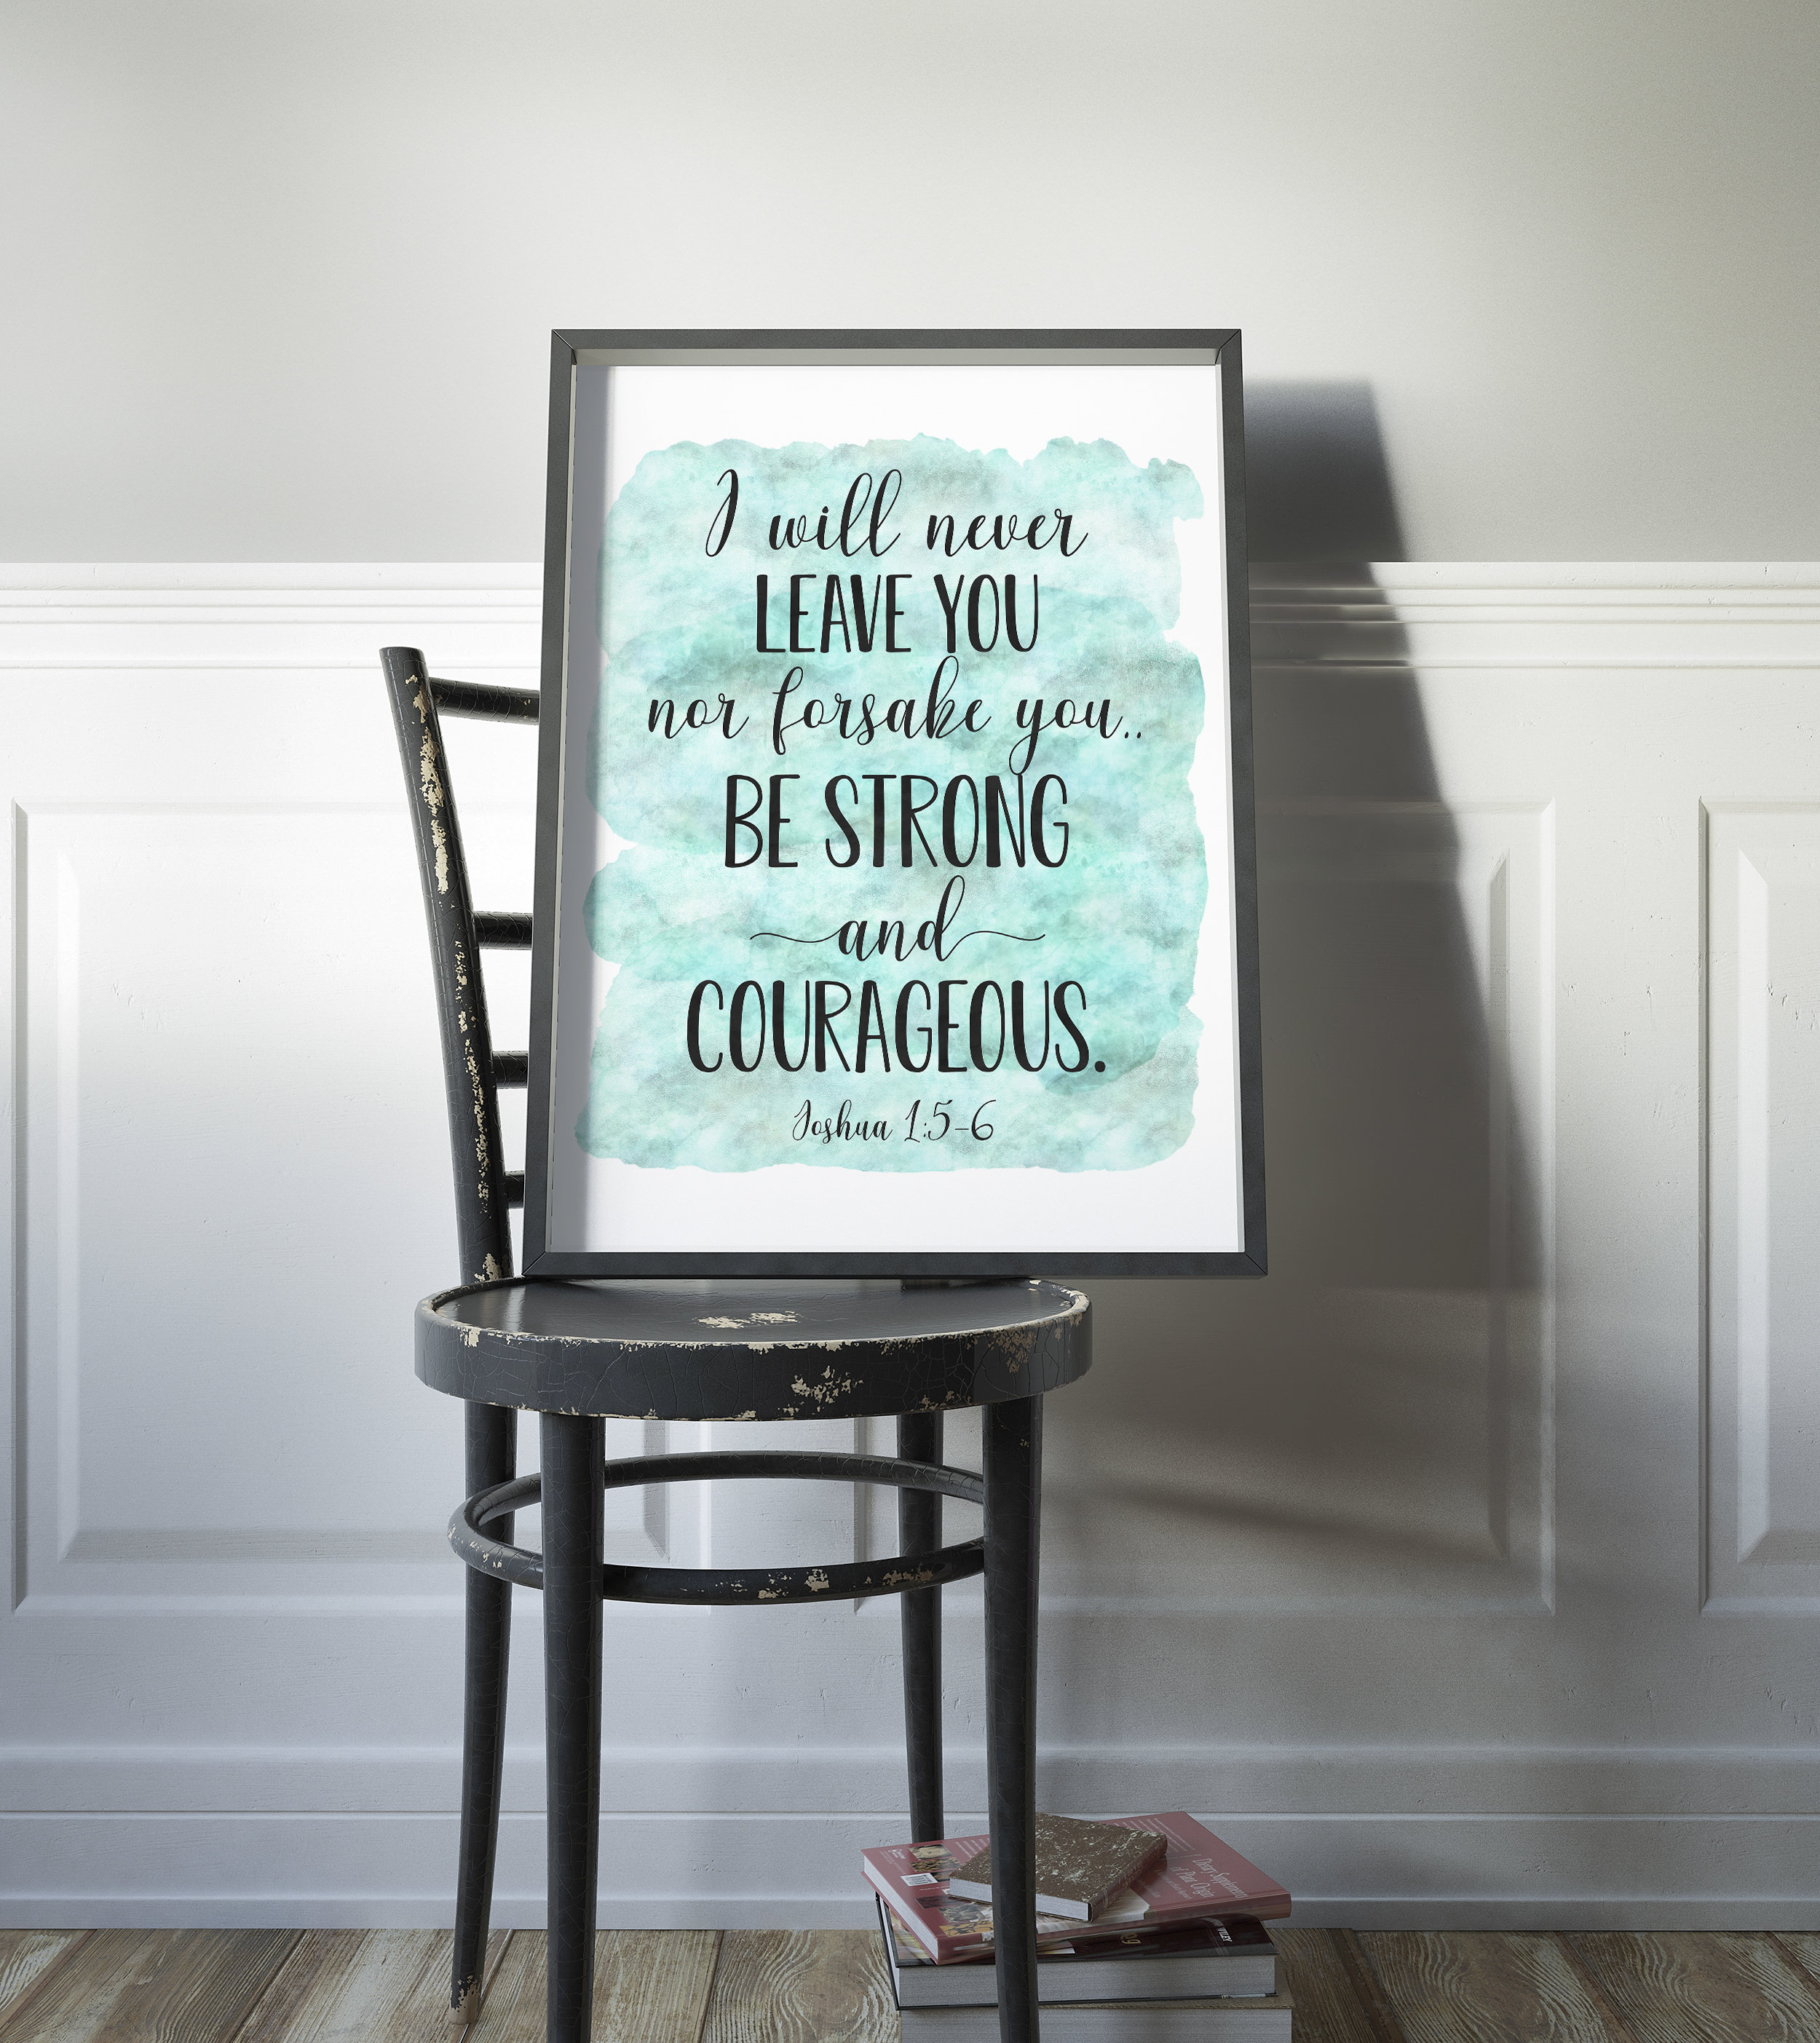 I Will Never Leave You Nor Forsake You, Joshua 1:5-6, Bible Verse Printable Wall Art